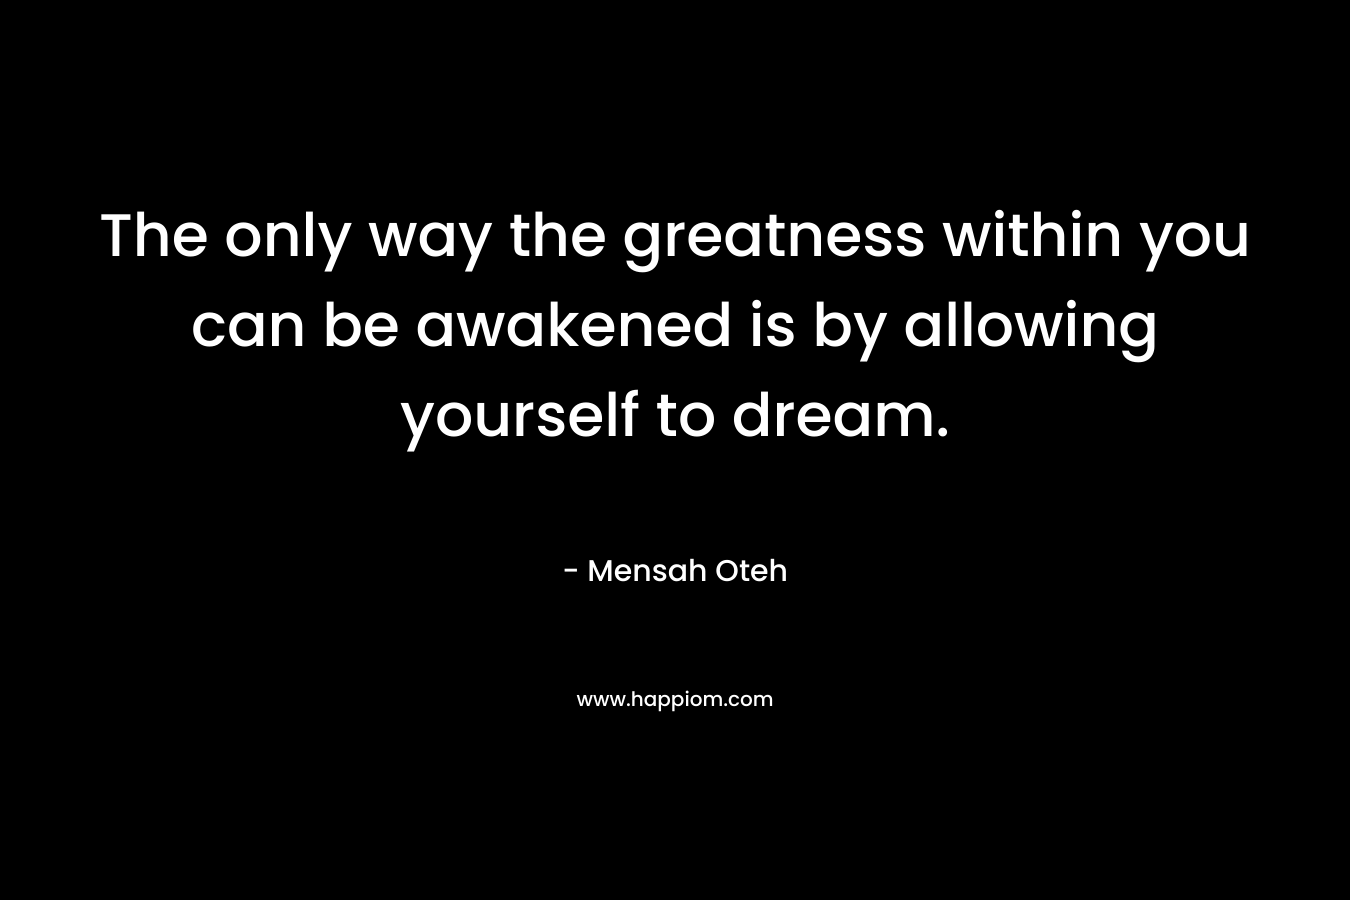 The only way the greatness within you can be awakened is by allowing yourself to dream.